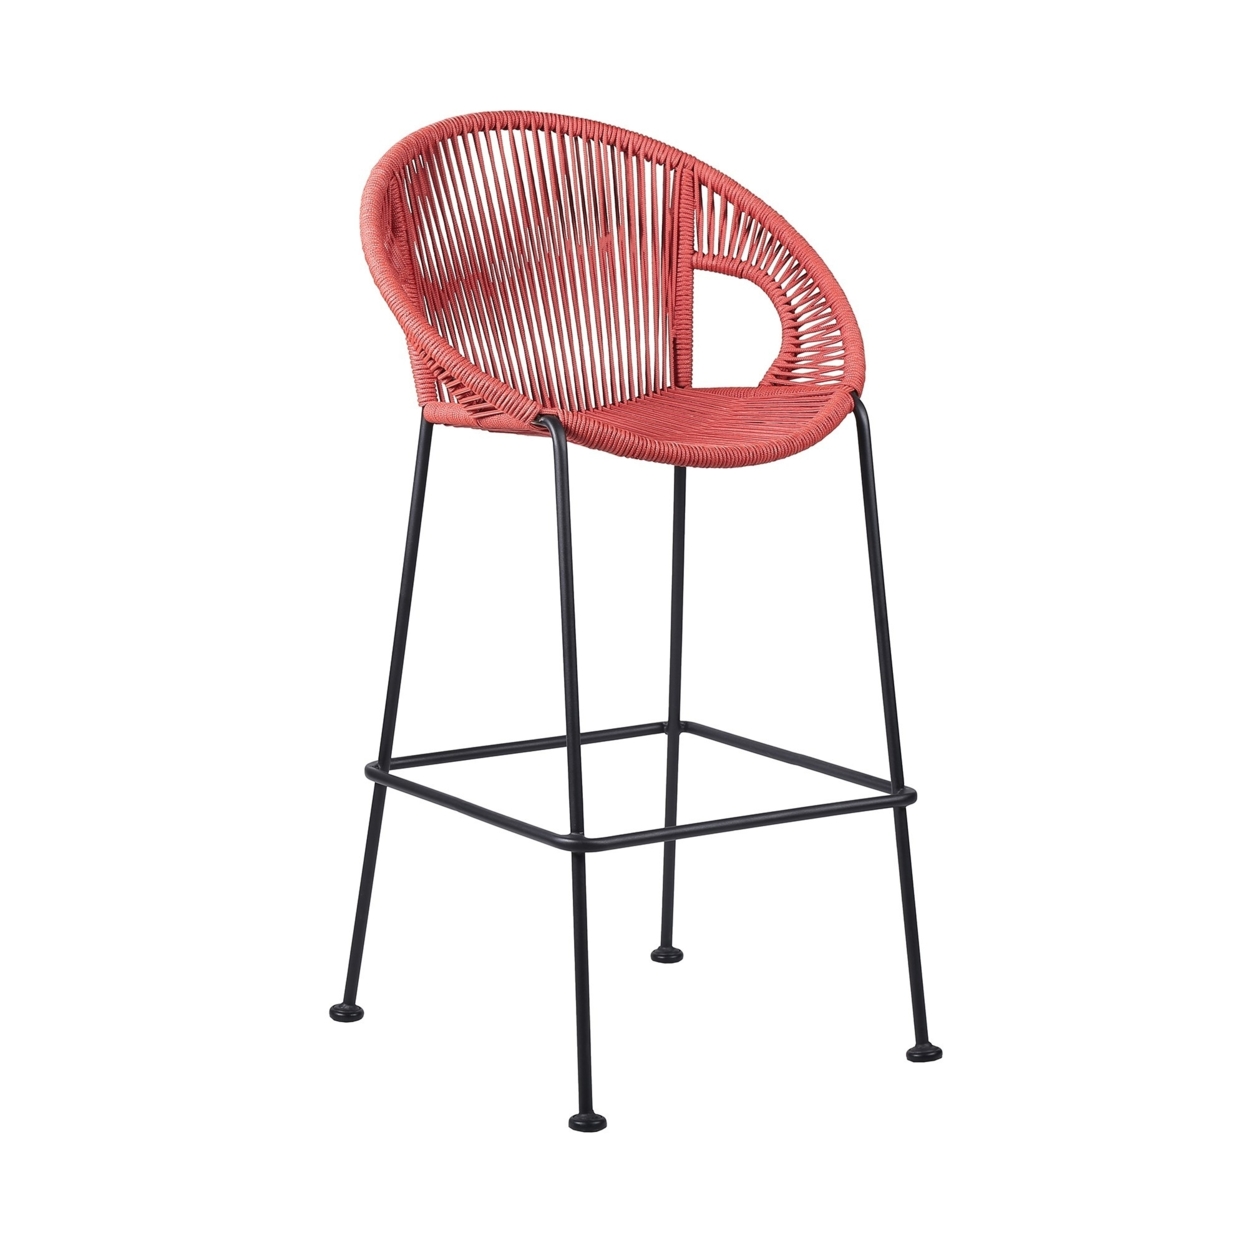 Indoor Outdoor Bar Stool With Rounded Rope Woven Seat, Pink- Saltoro Sherpi